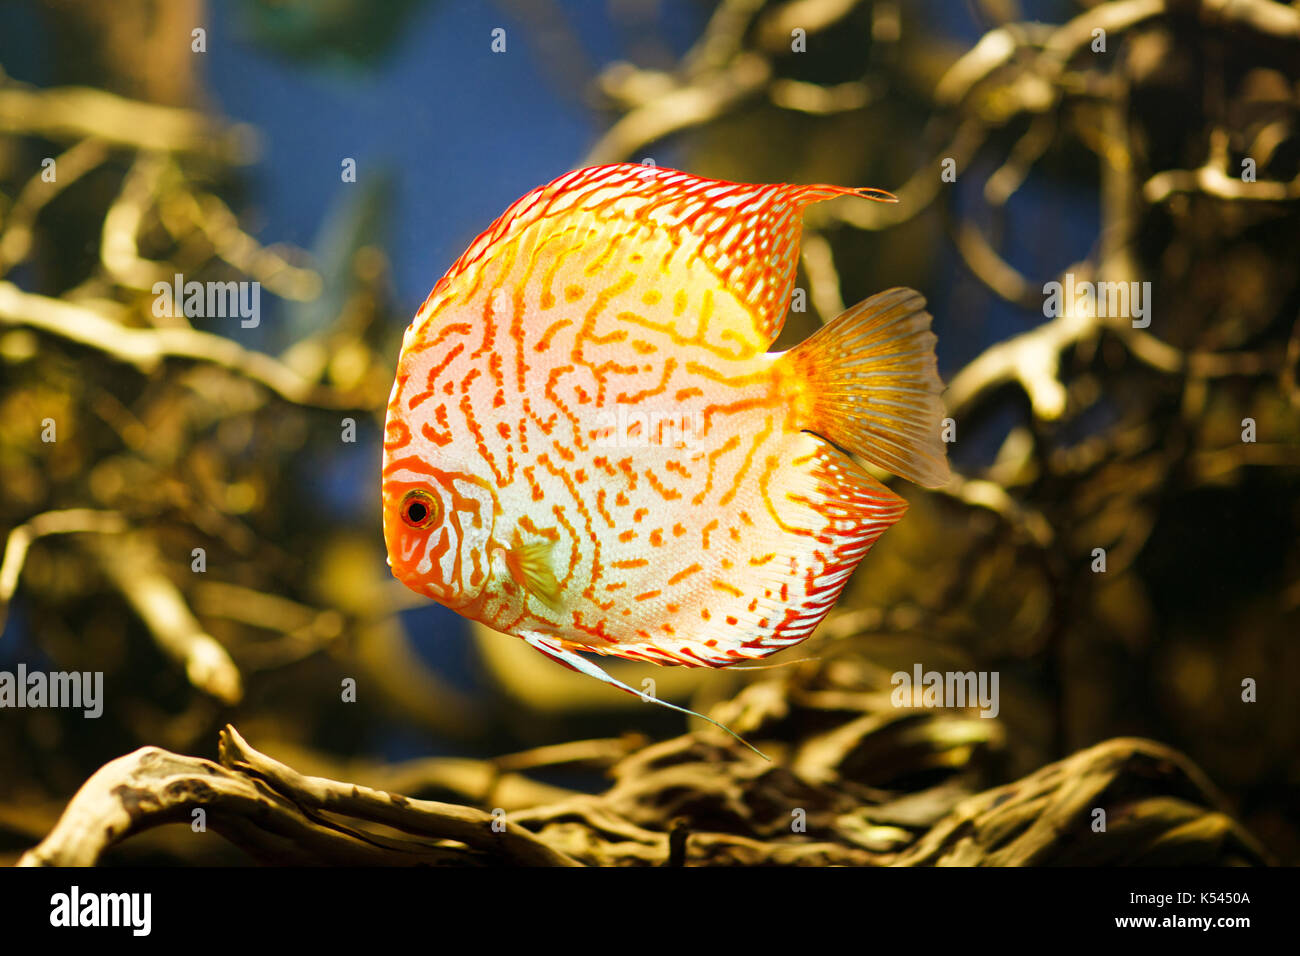 Discus Symphysodon spp. , freshwater fish native to the Amazon River. High quality image. Stock Photo